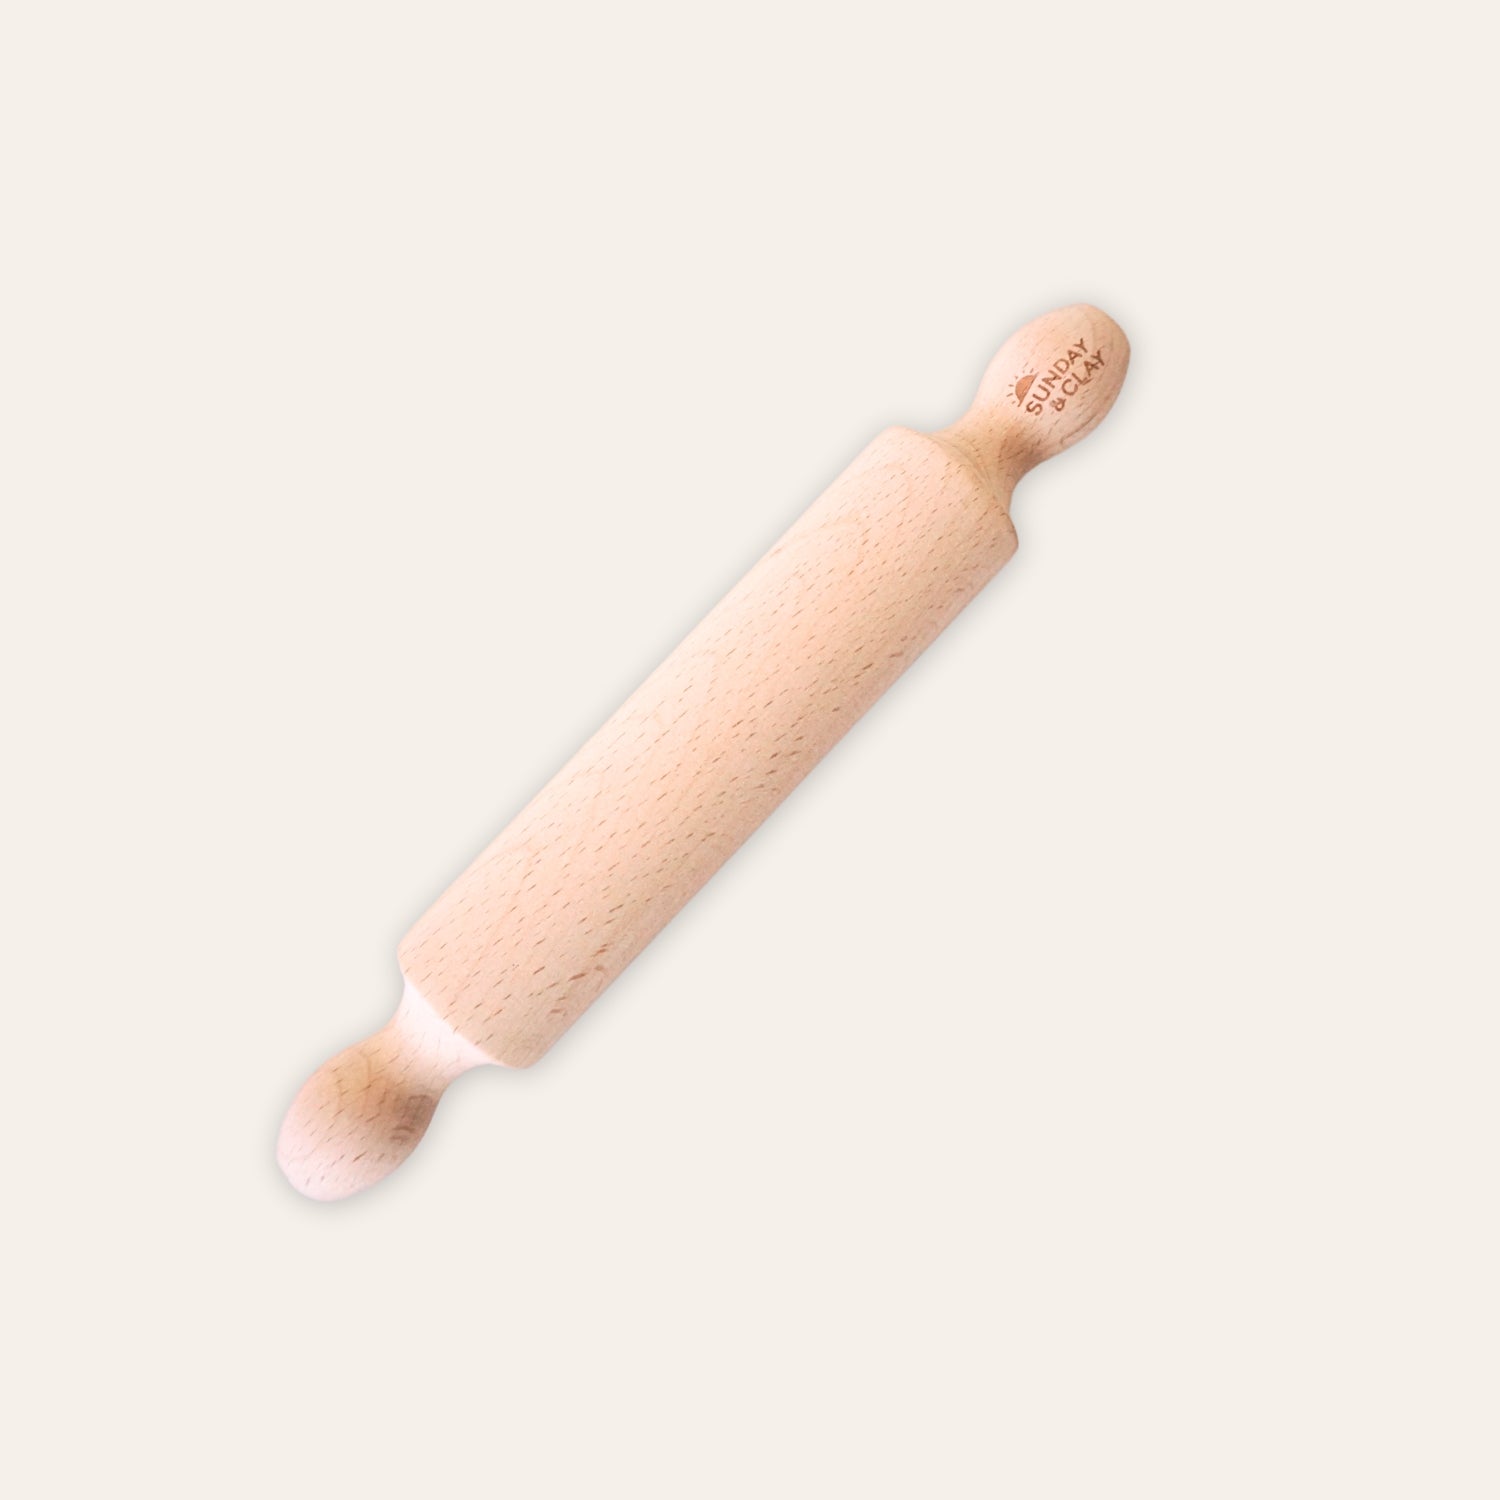 The S&C rolling pin with each clay kit.